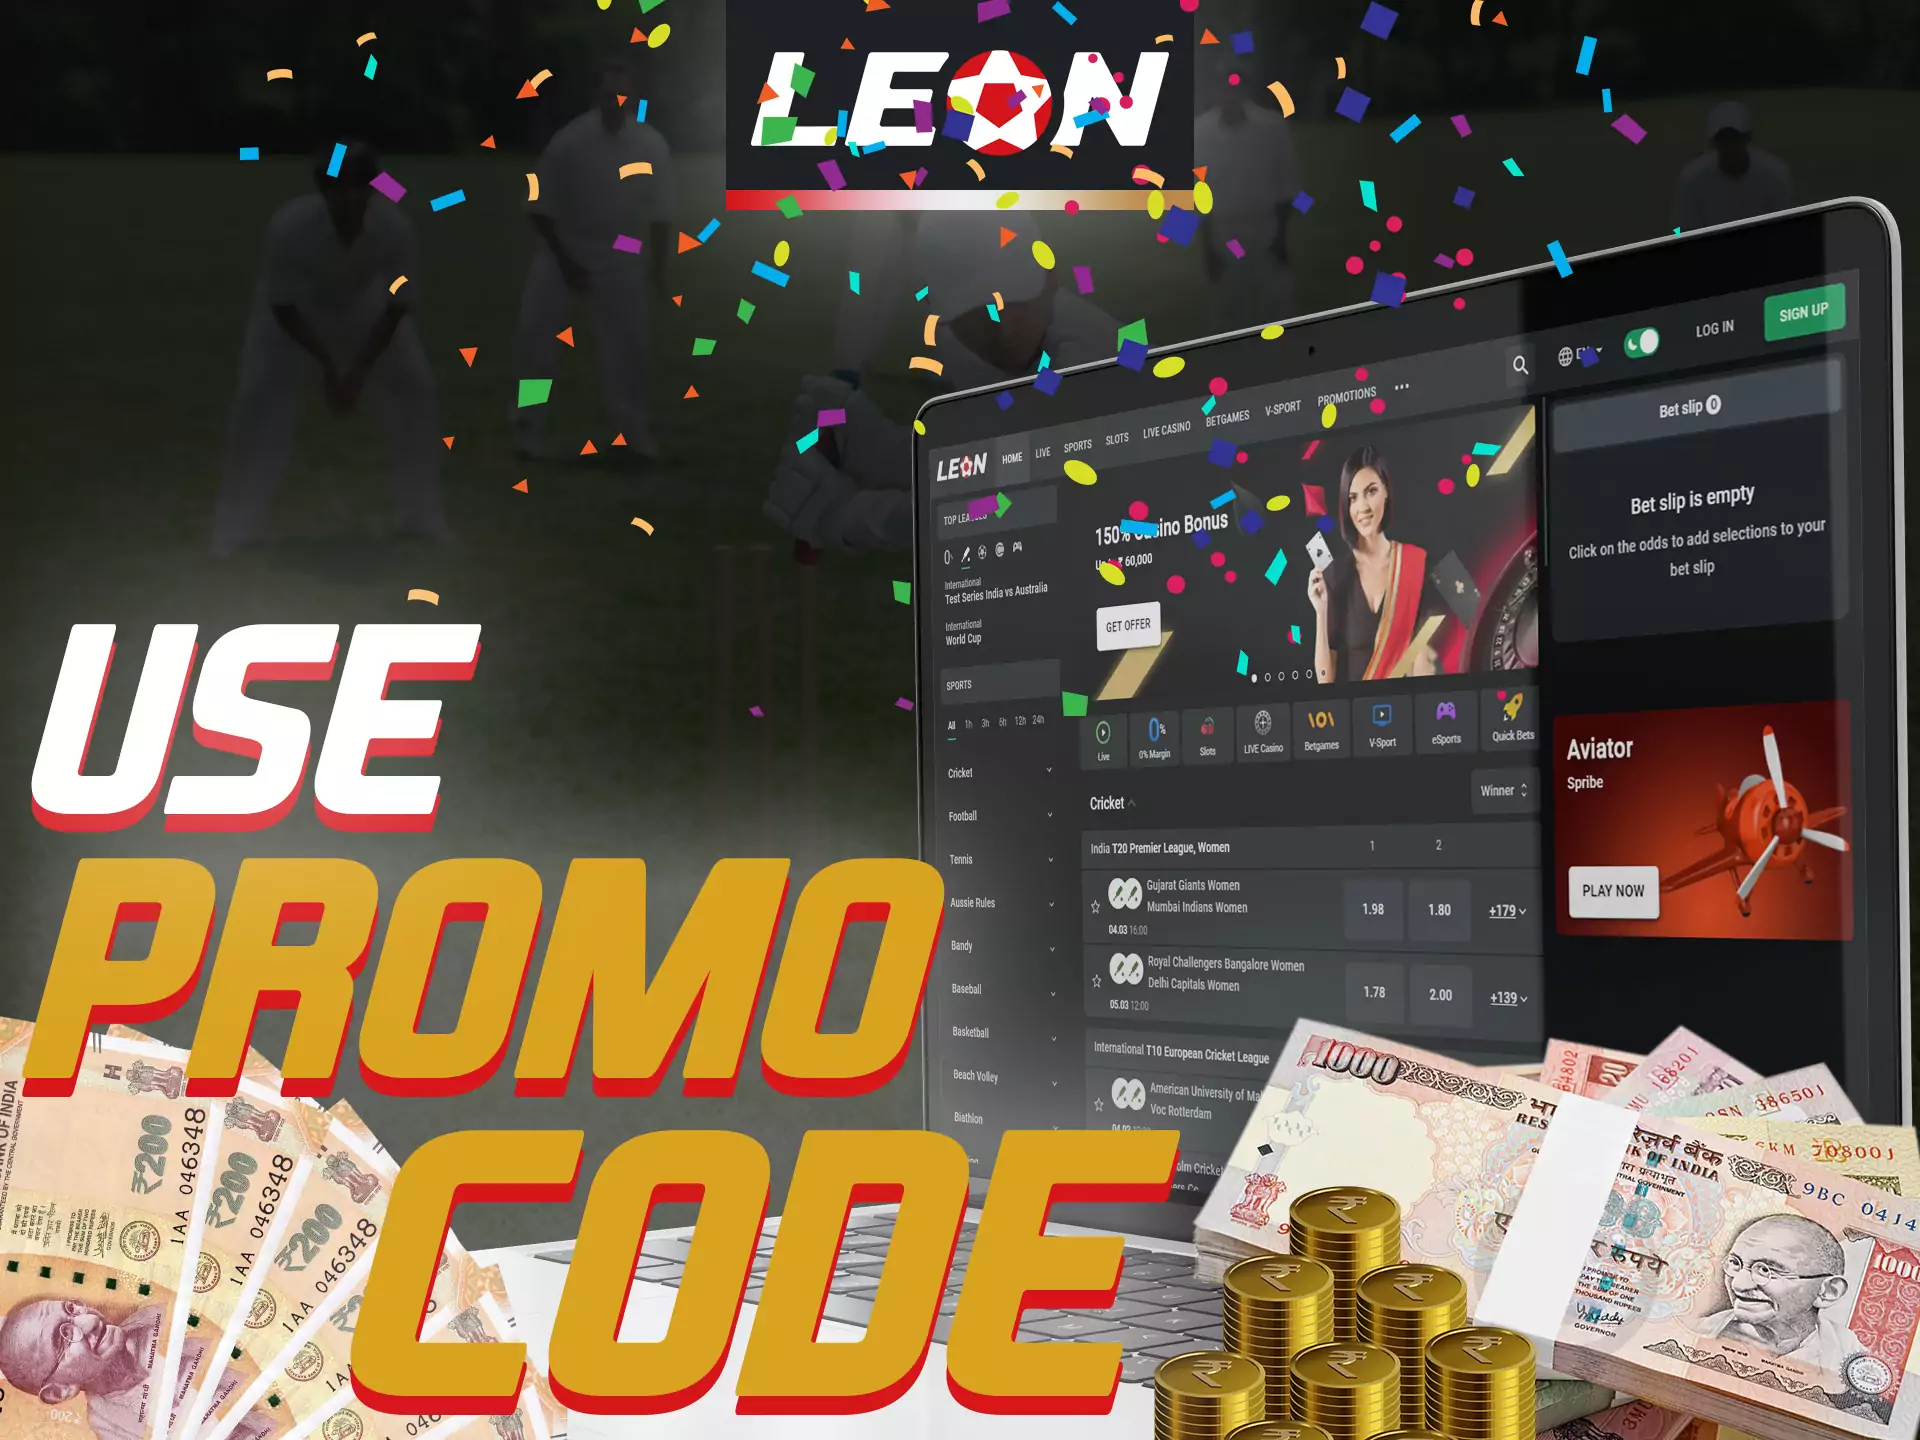 At Leonbet, make sure you use a promo code when you register.